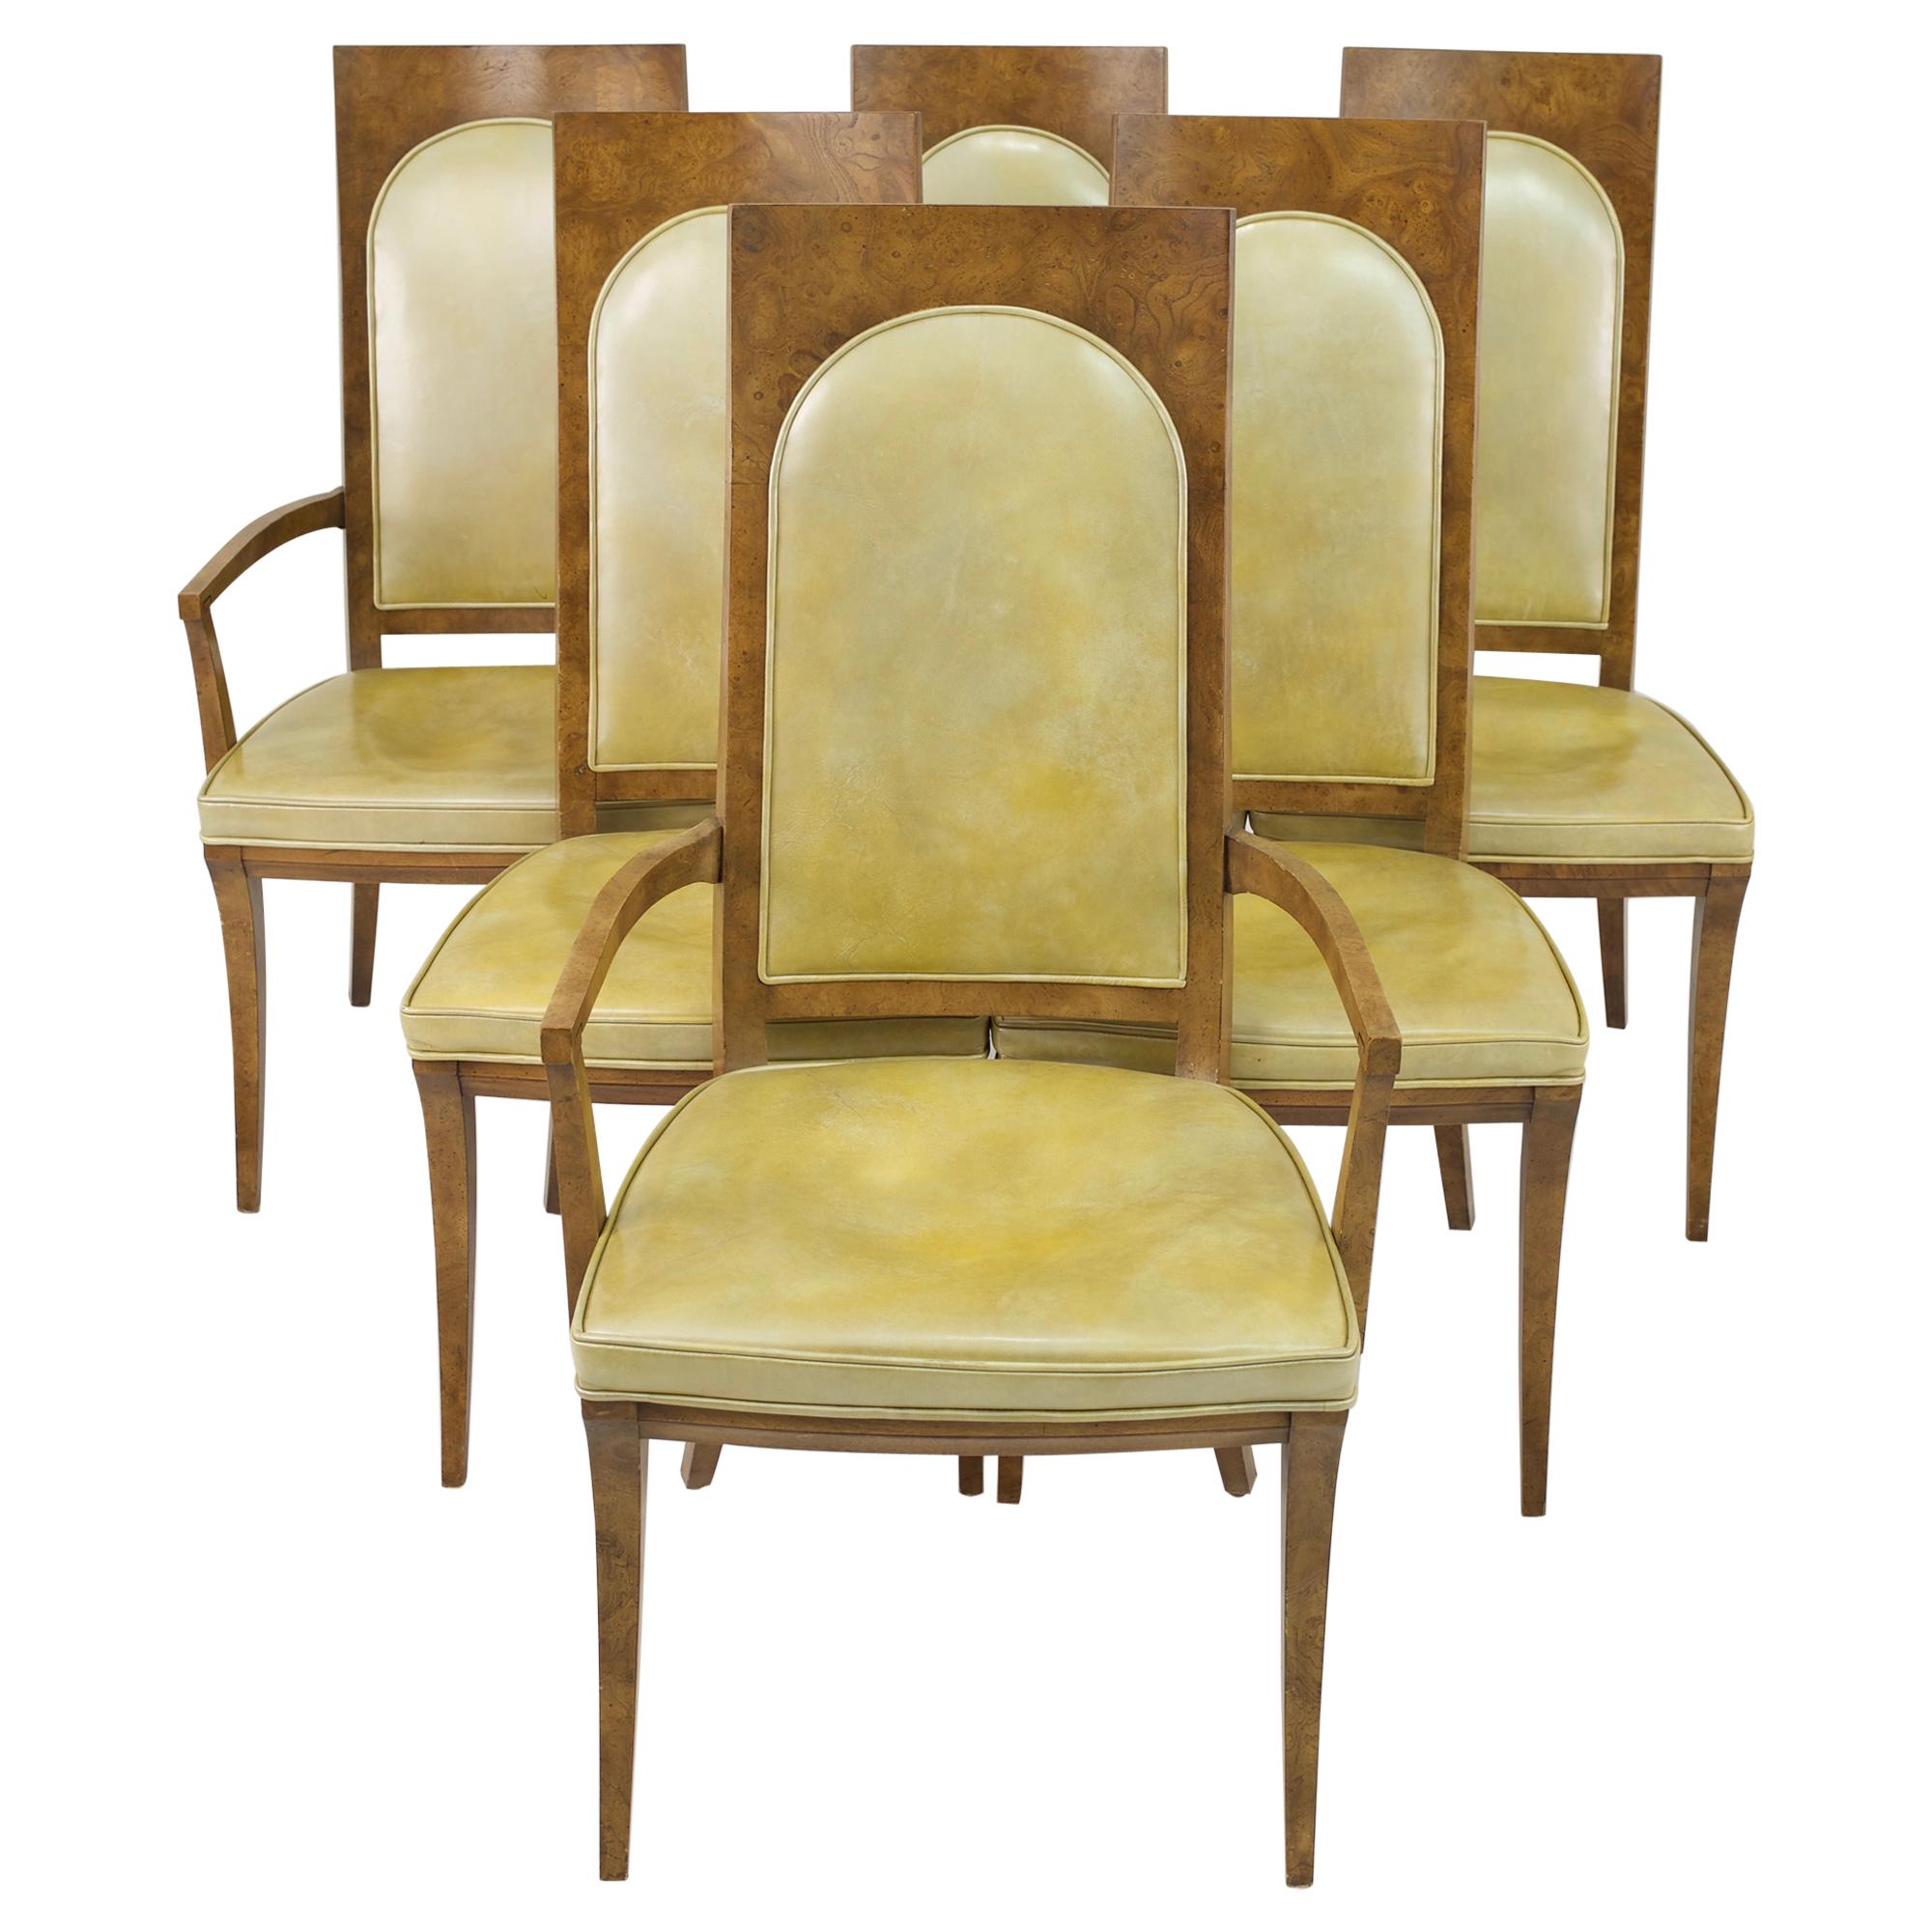 Mastercraft Mid Century Burlwood Dining Chairs - Set of 6

Each chair measures: 22 wide x 19.5 deep x 41.5 high with a seat height of 18 inches 

This price includes getting this piece in what we call Restored Vintage Condition. That means the